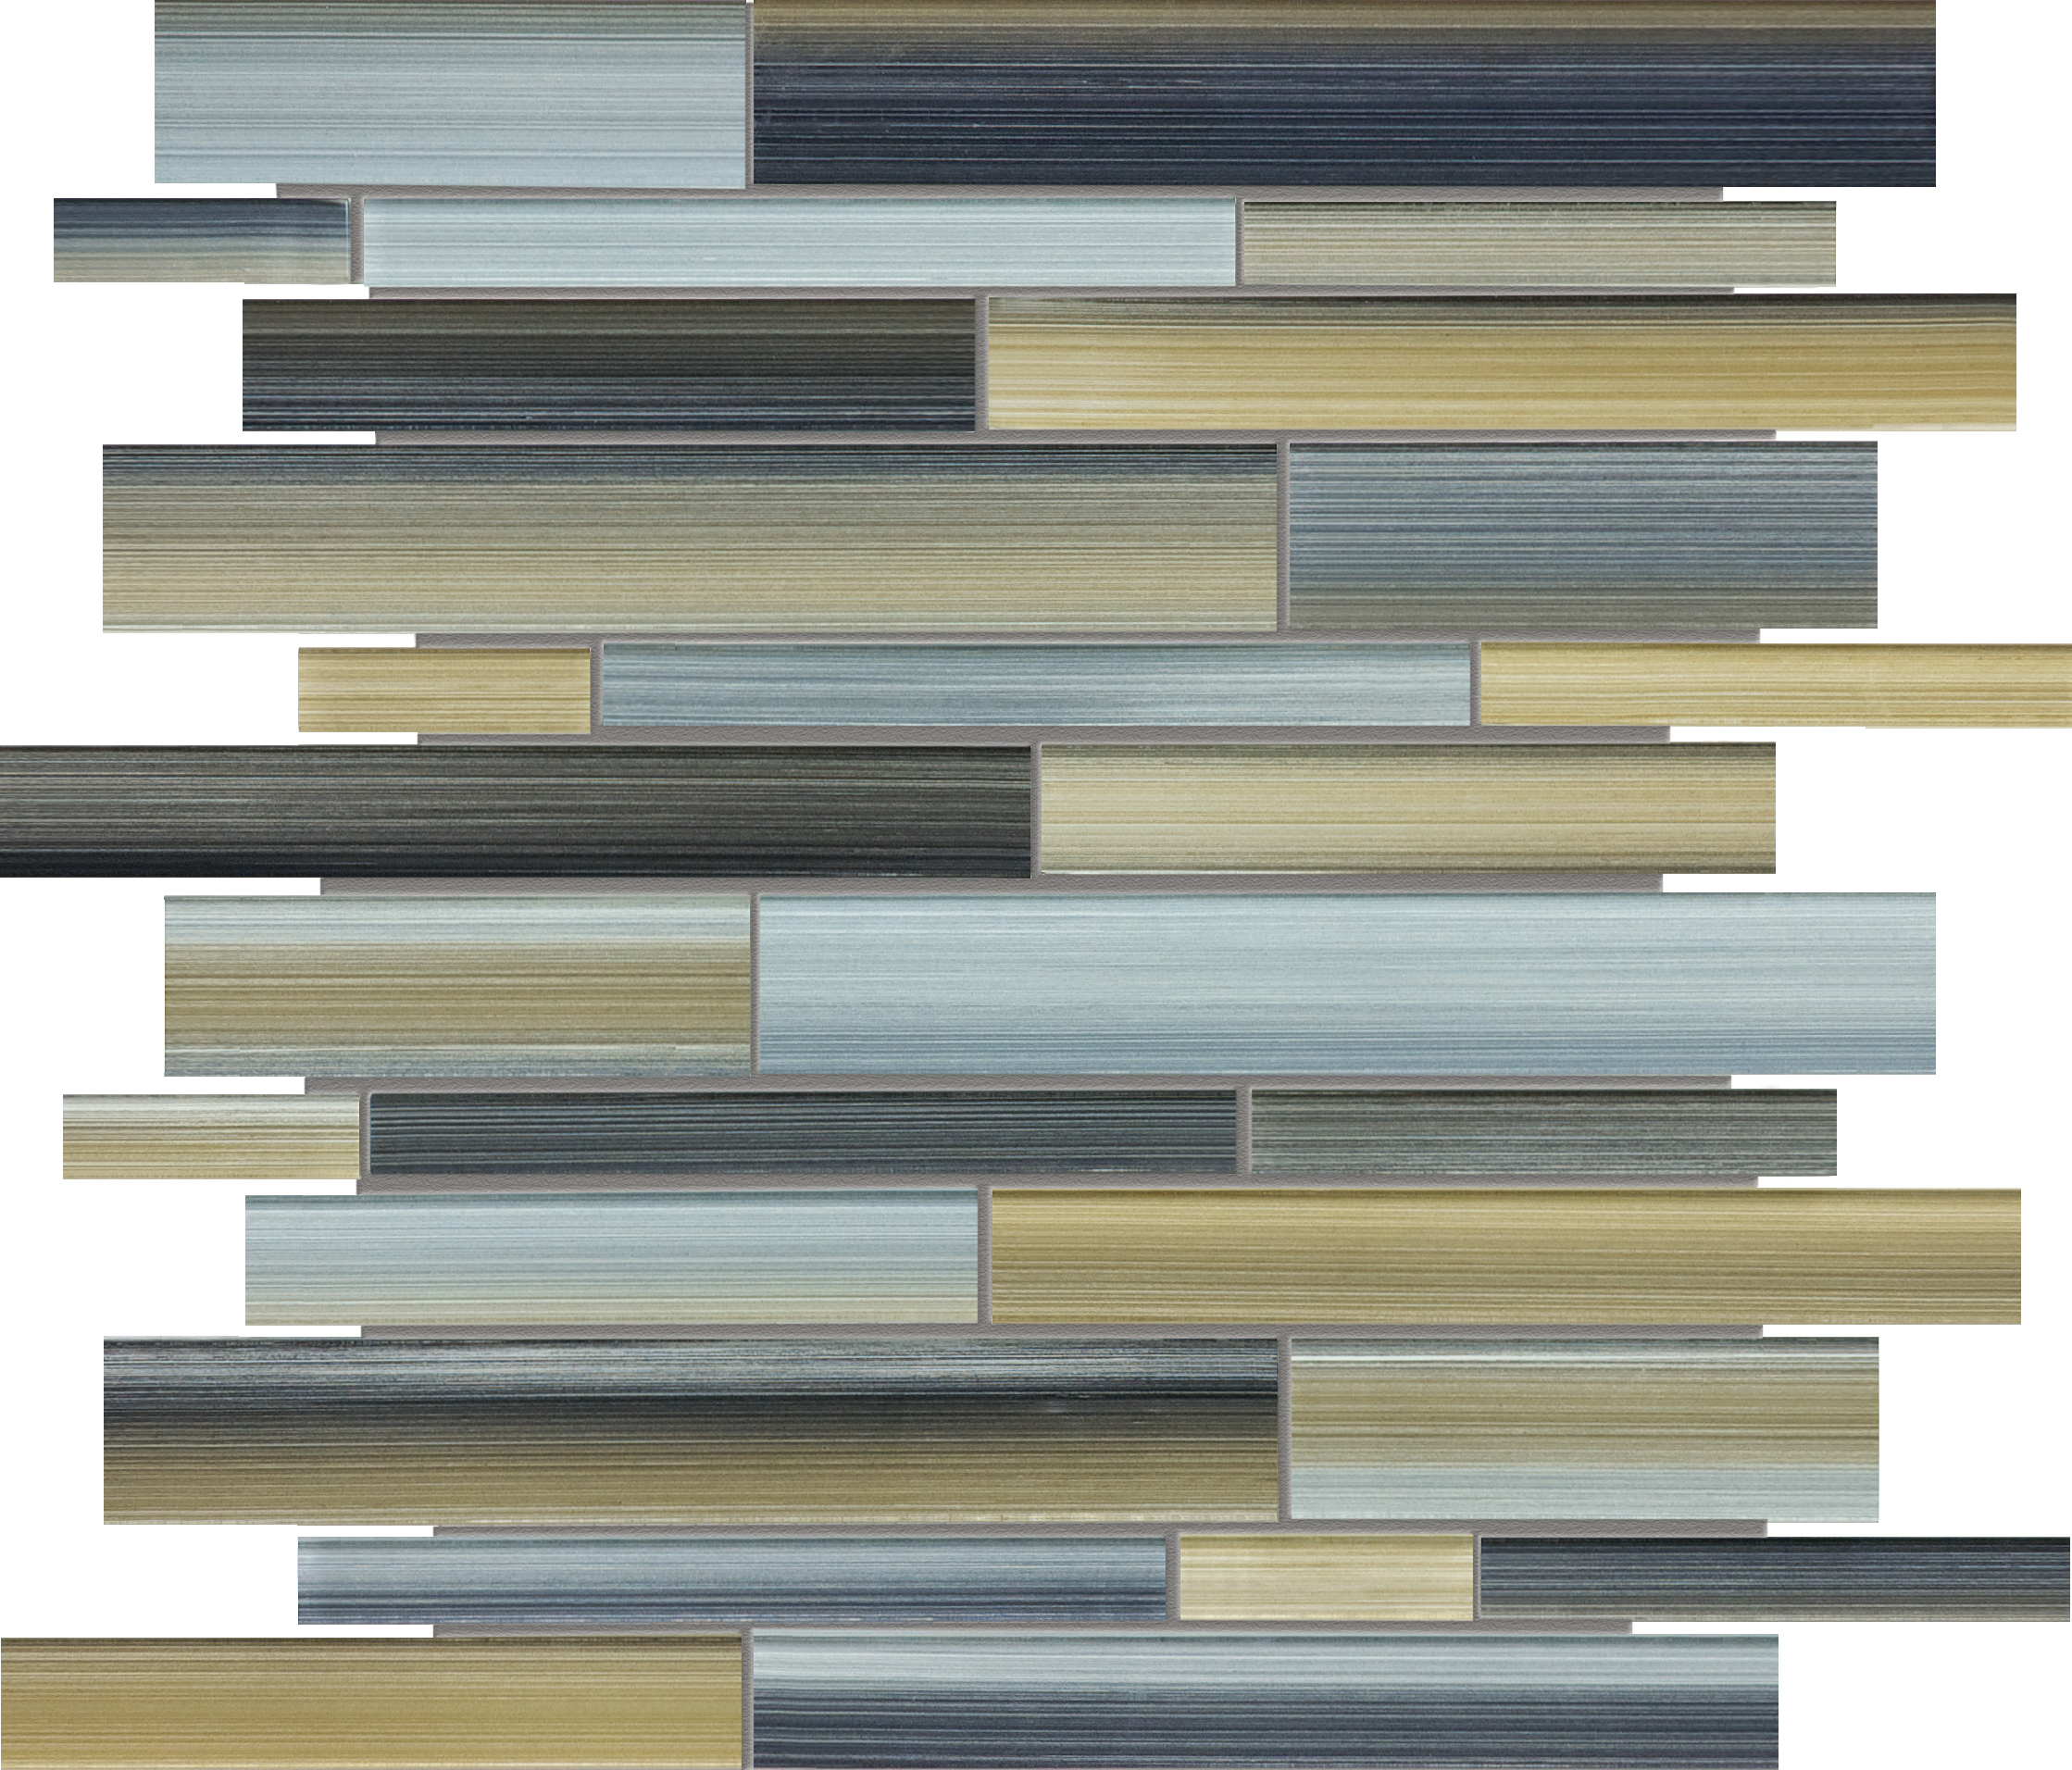 oxide random strip pattern fused glass mosaic from fusion anatolia collection distributed by surface group international glossy finish rounded edge mesh shape